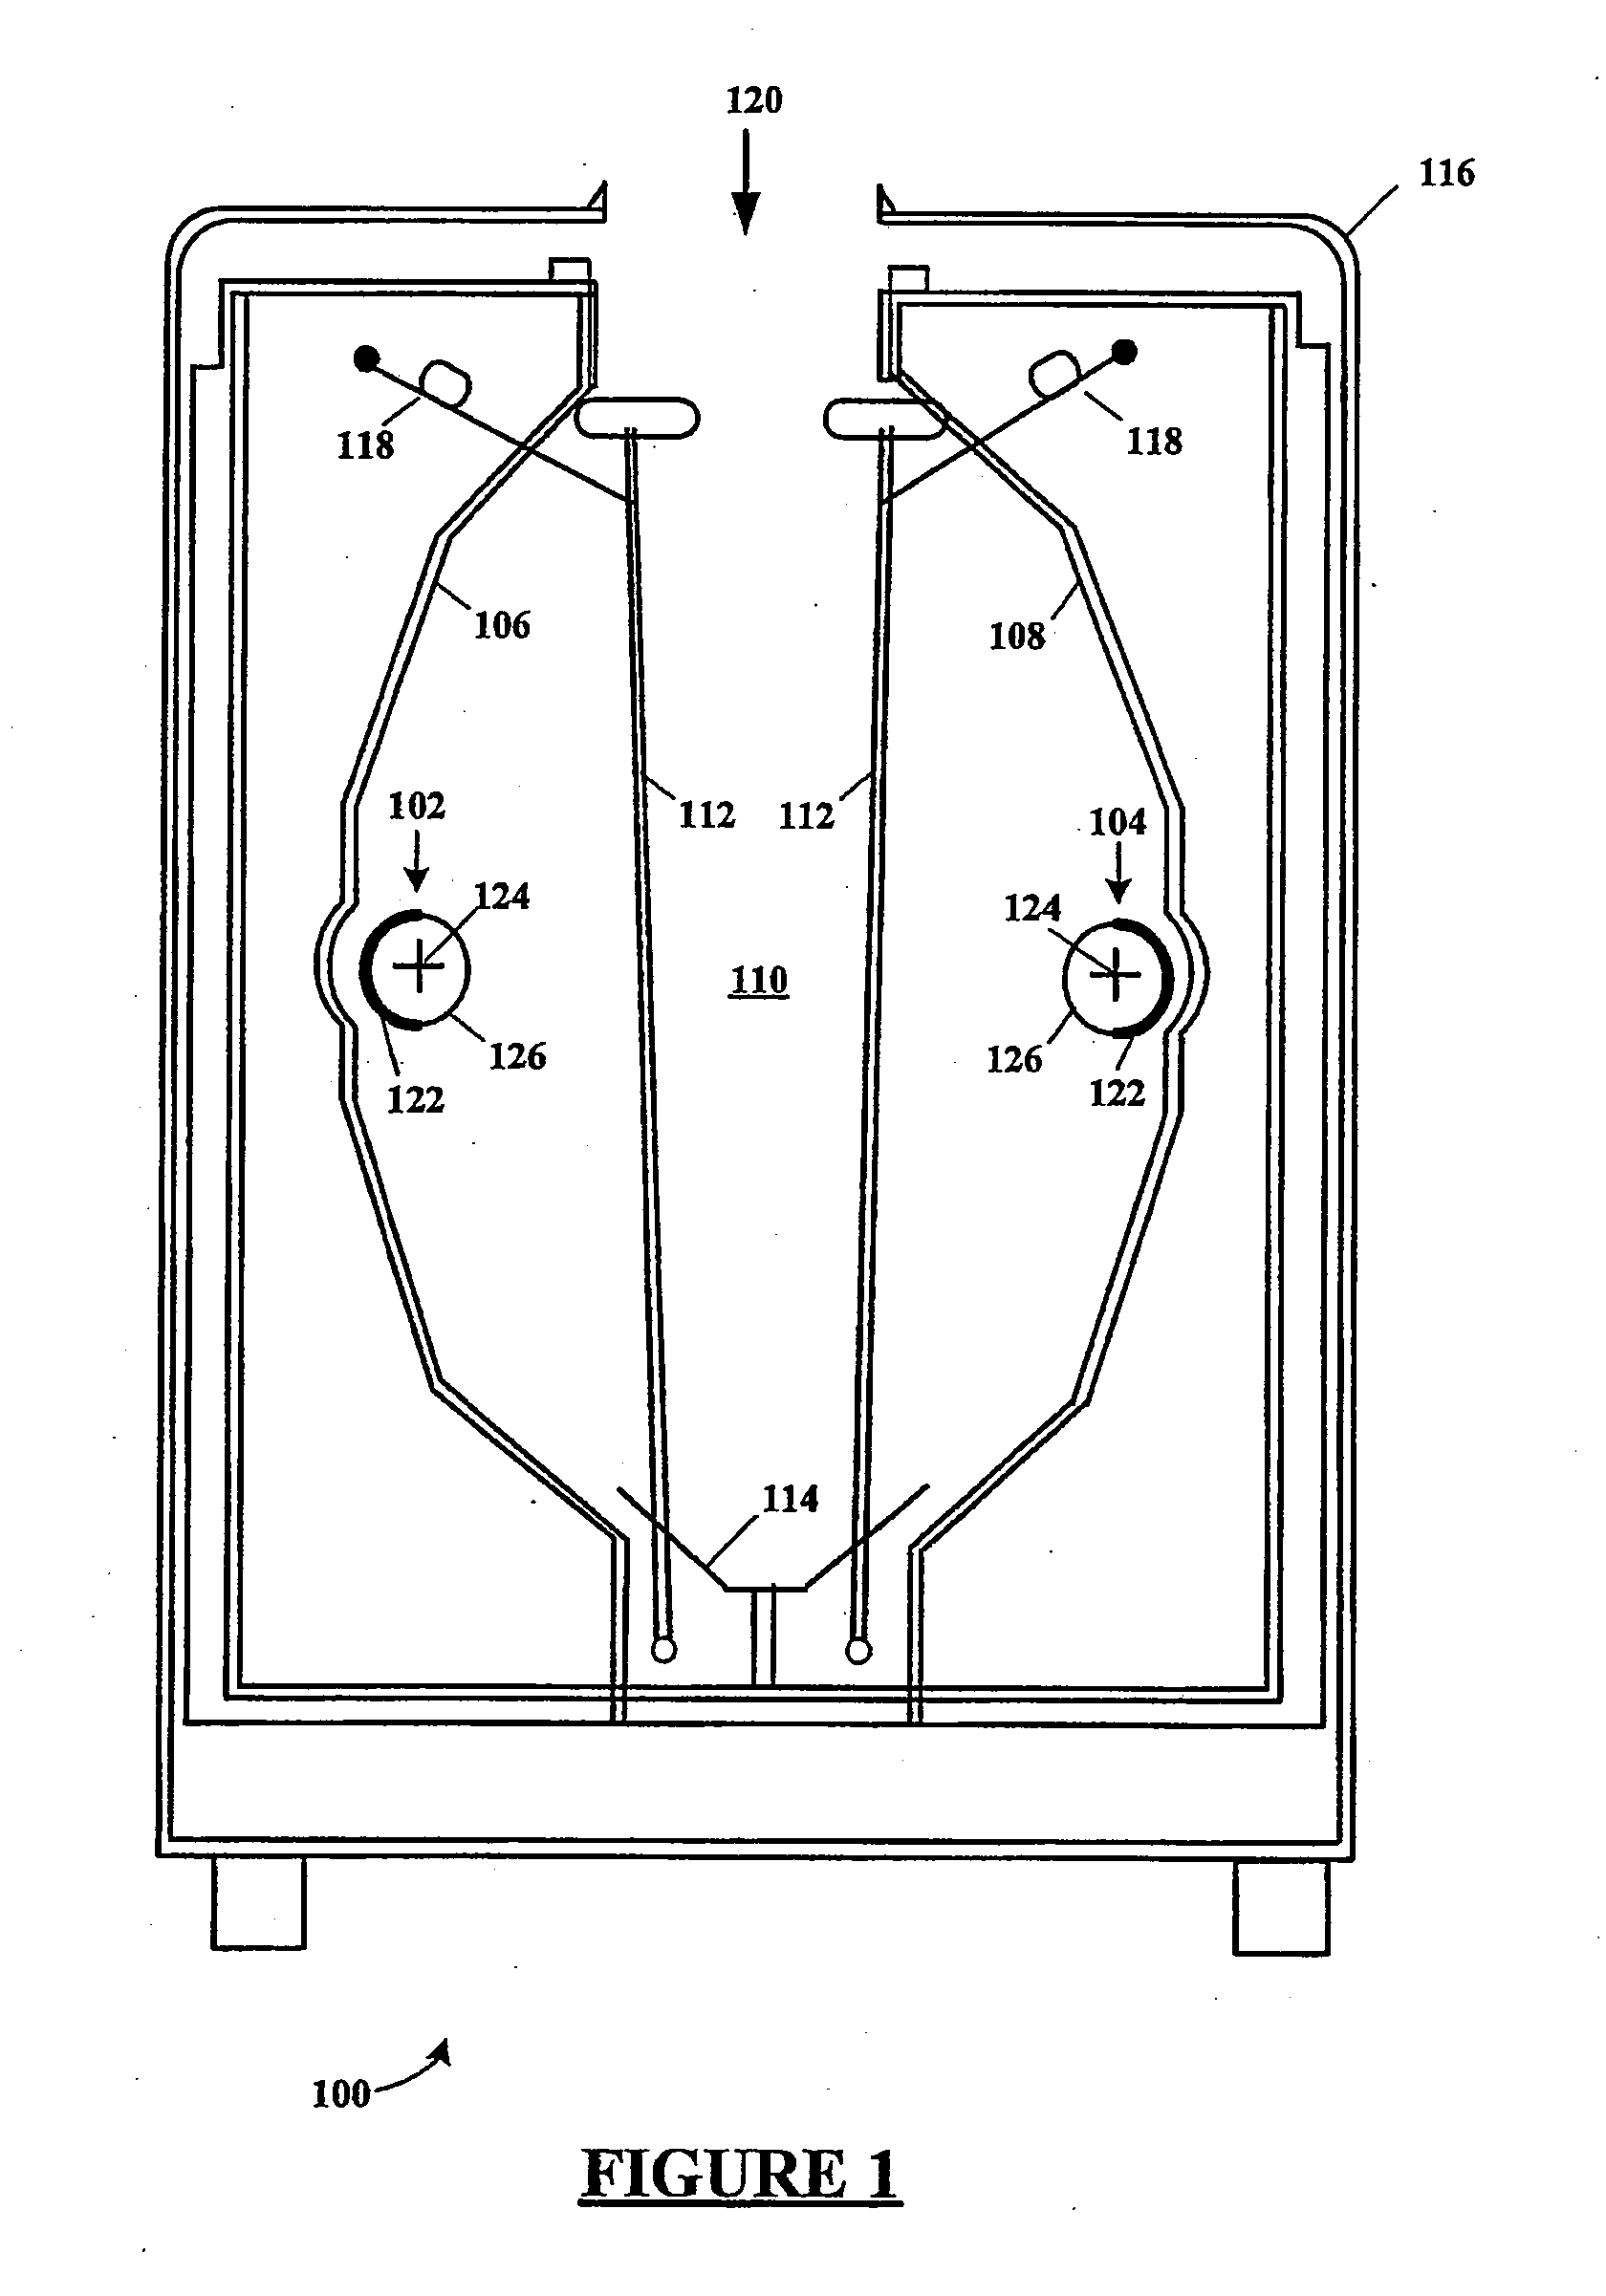 Method for toasting a food product with infrared radiant heat